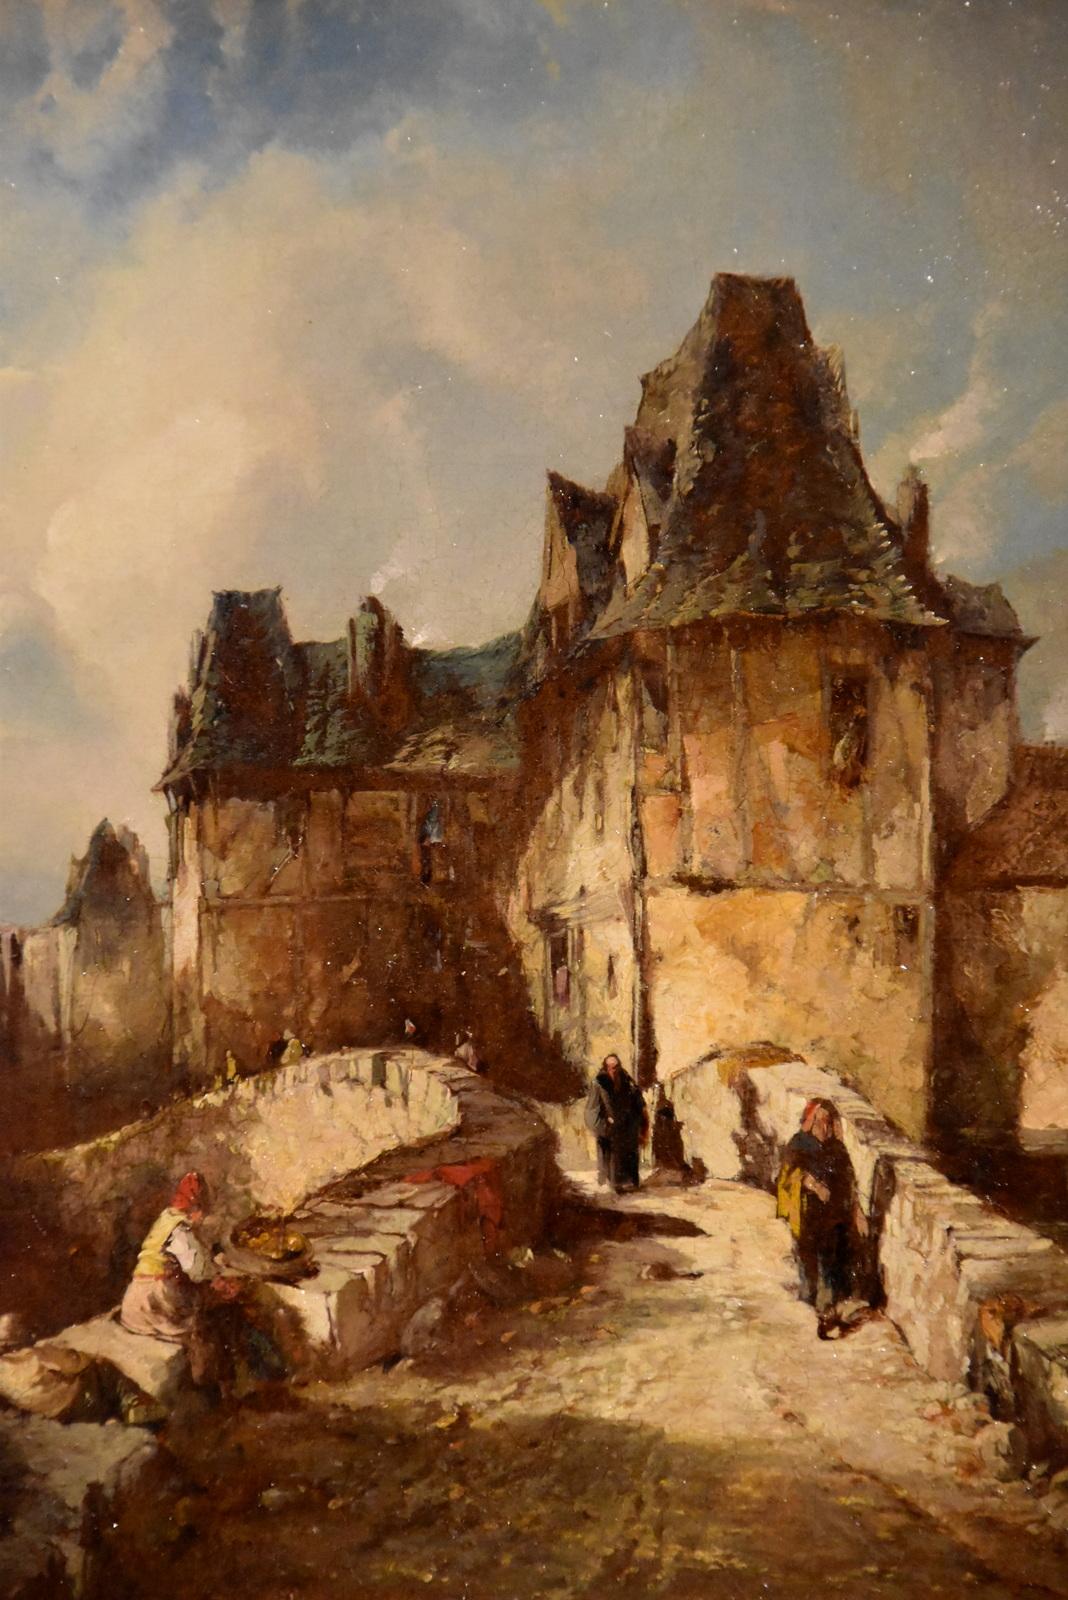 “A Back Street in Rouen” by Alfred Montague, R. B. A. Alfred Montague exhibited 1832-1863. He was a leading member of the Royal Society of British Artists with over 150 exhibited works. Oil on board. Signed and dated 1864 in fine period